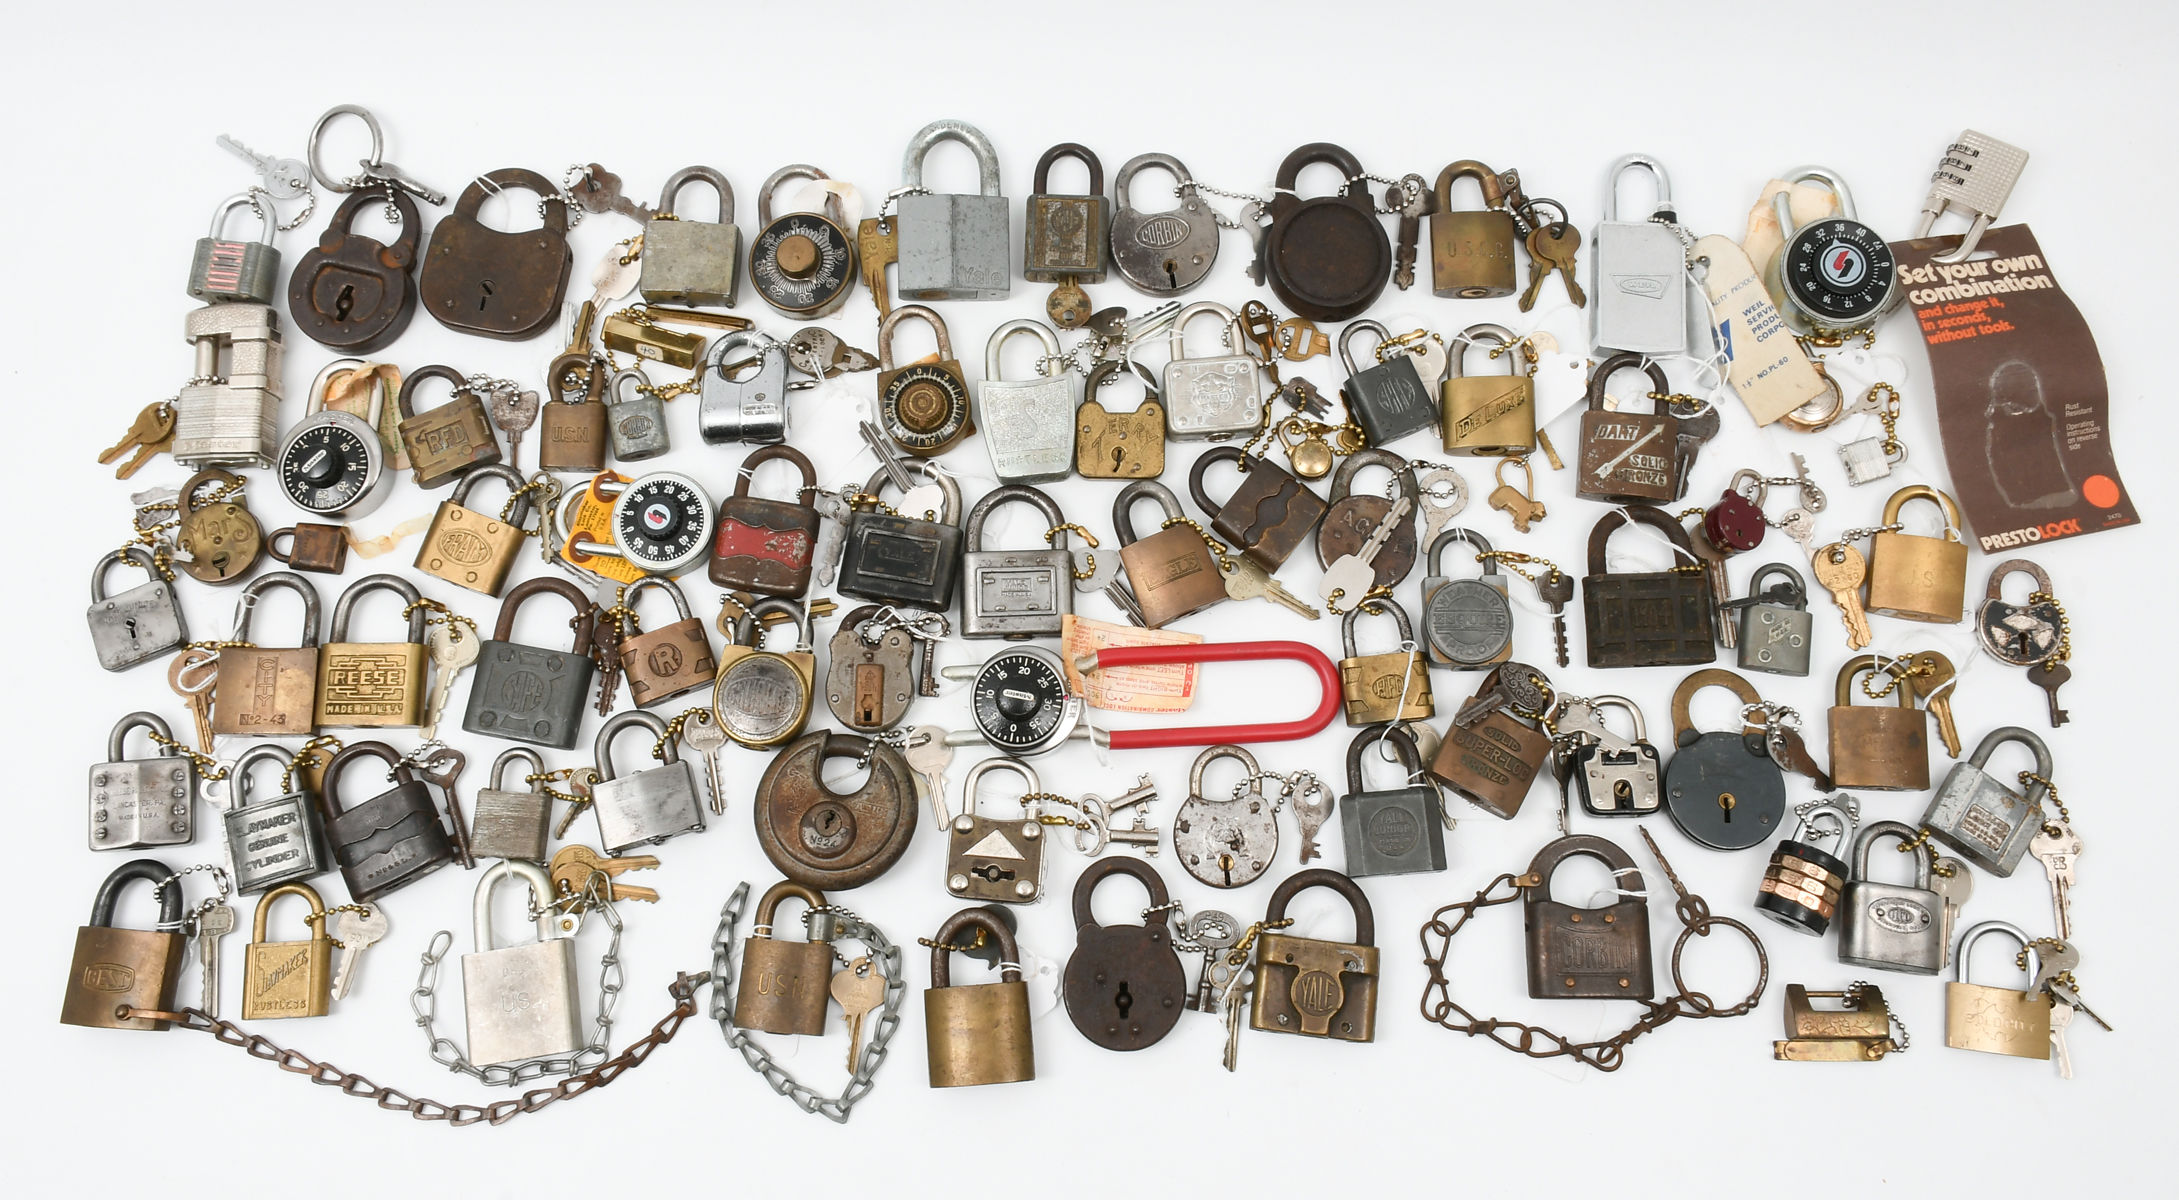 LARGE COLLECTION OF LOCKS: A large